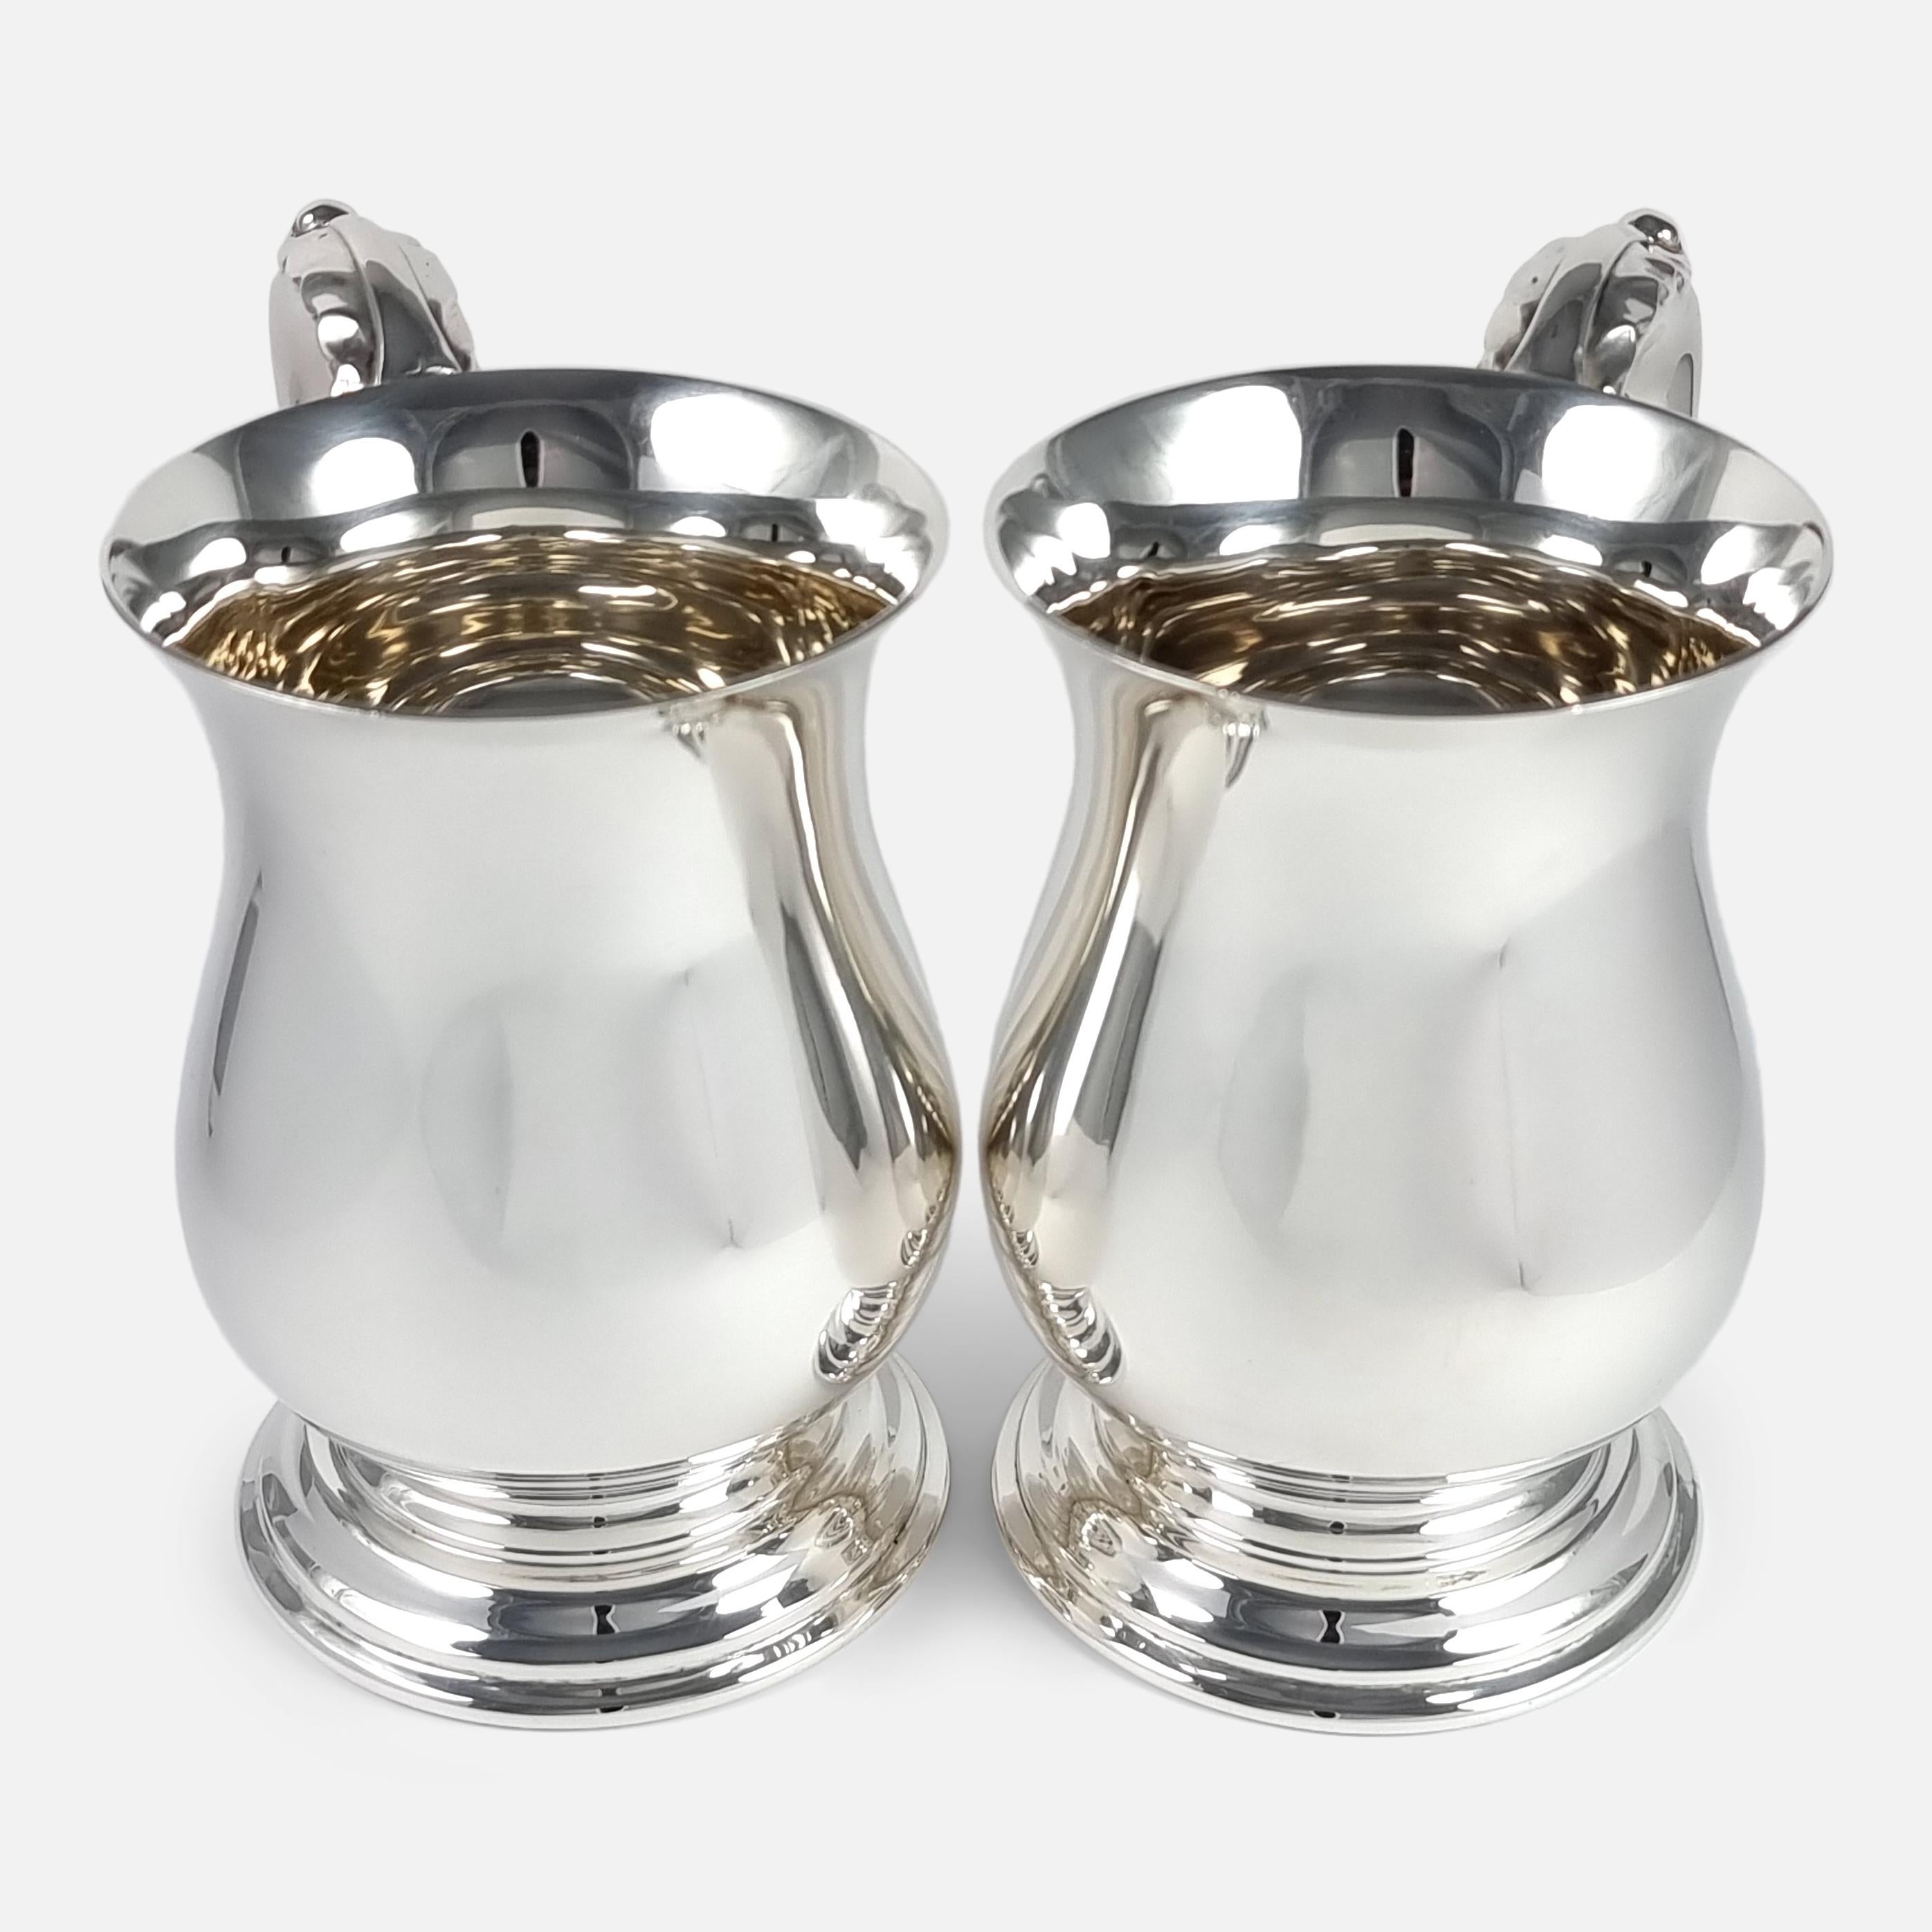 A pair of George VI sterling silver mugs. The mugs (or tankards) are crafted in the George III style, of baluster form upon a spreading circular foot, with acanthus capped double C scroll handles.

The pair of mugs are made by Stower & Wragg Ltd,